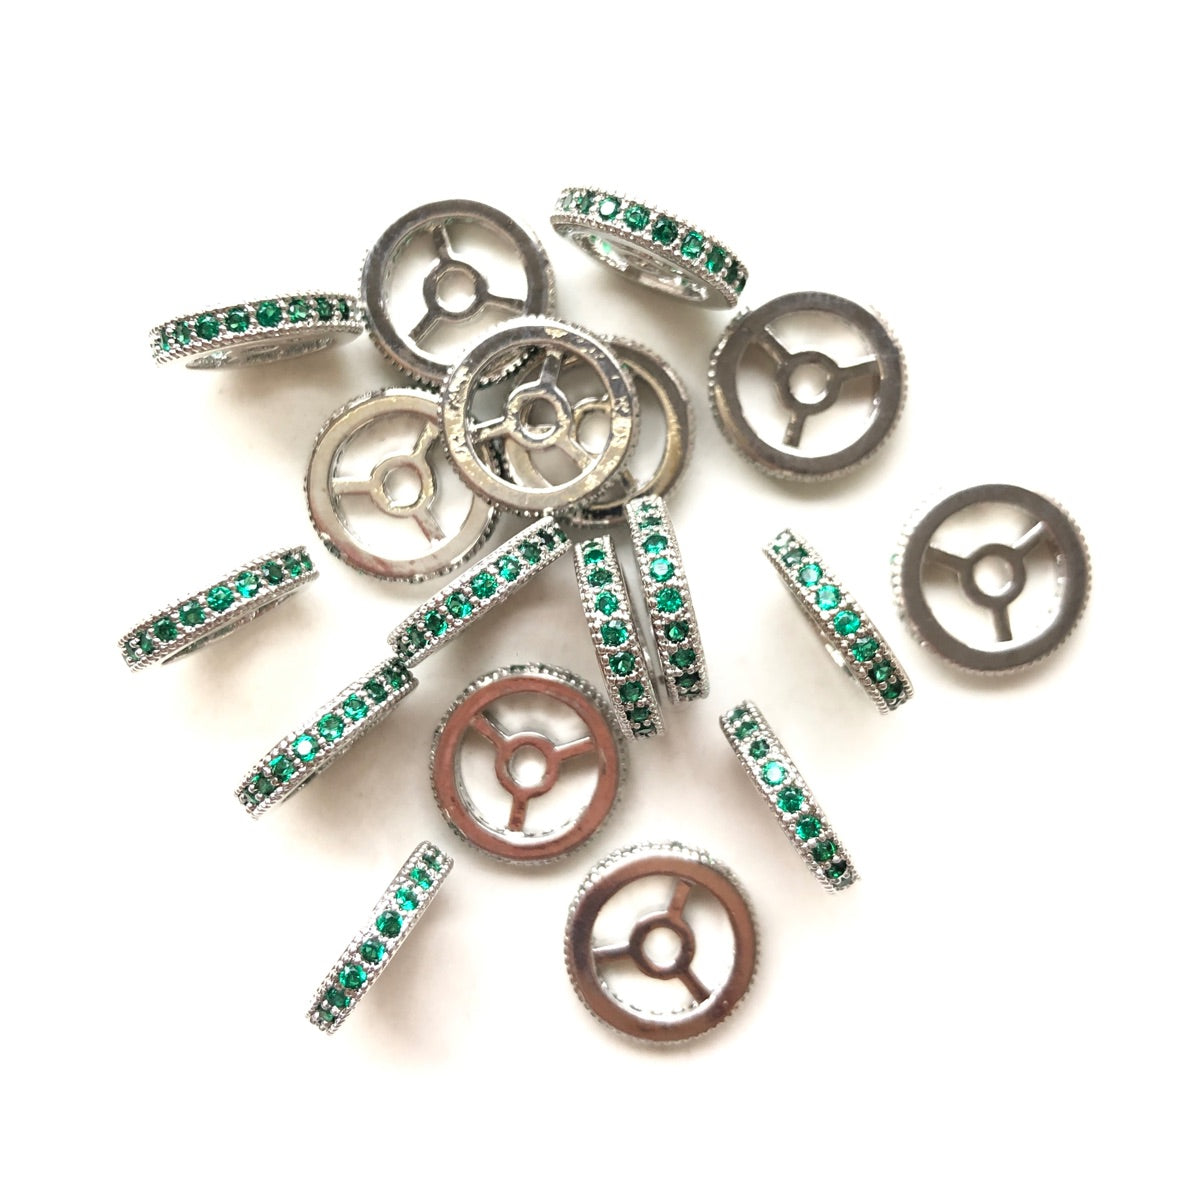 20pcs/lot 9.6/12mm Green CZ Paved Wheel Rondelle Spacers Silver CZ Paved Spacers New Spacers Arrivals Rondelle Beads Charms Beads Beyond